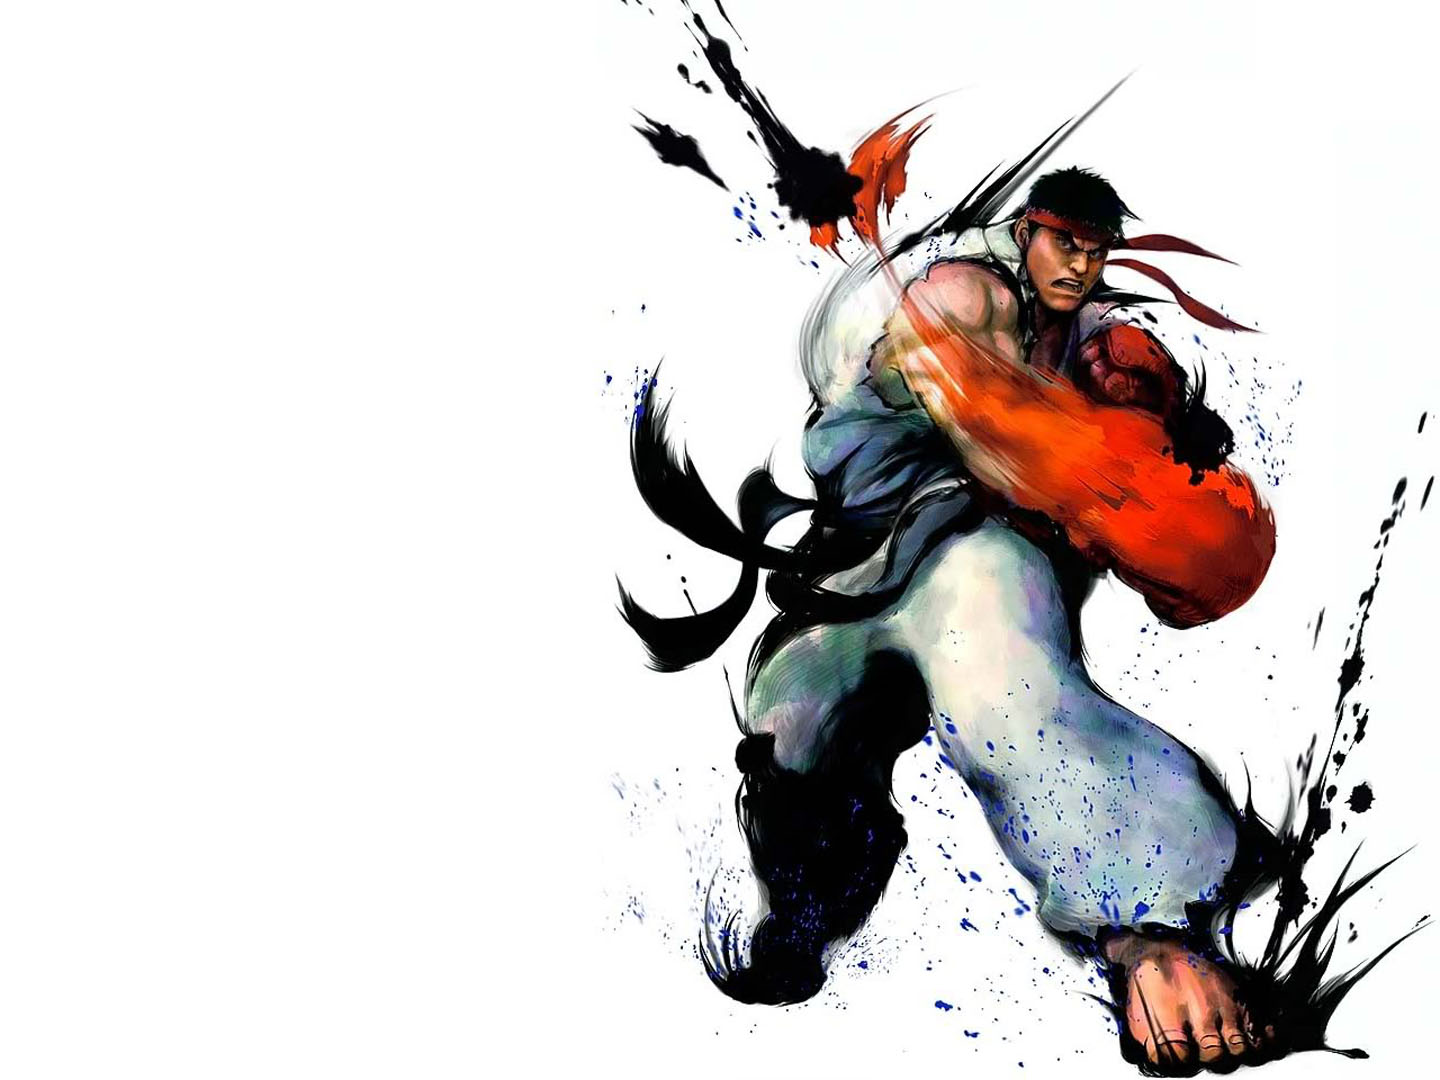 Free Backgrounds and Wallpapers featuring Fighting Games